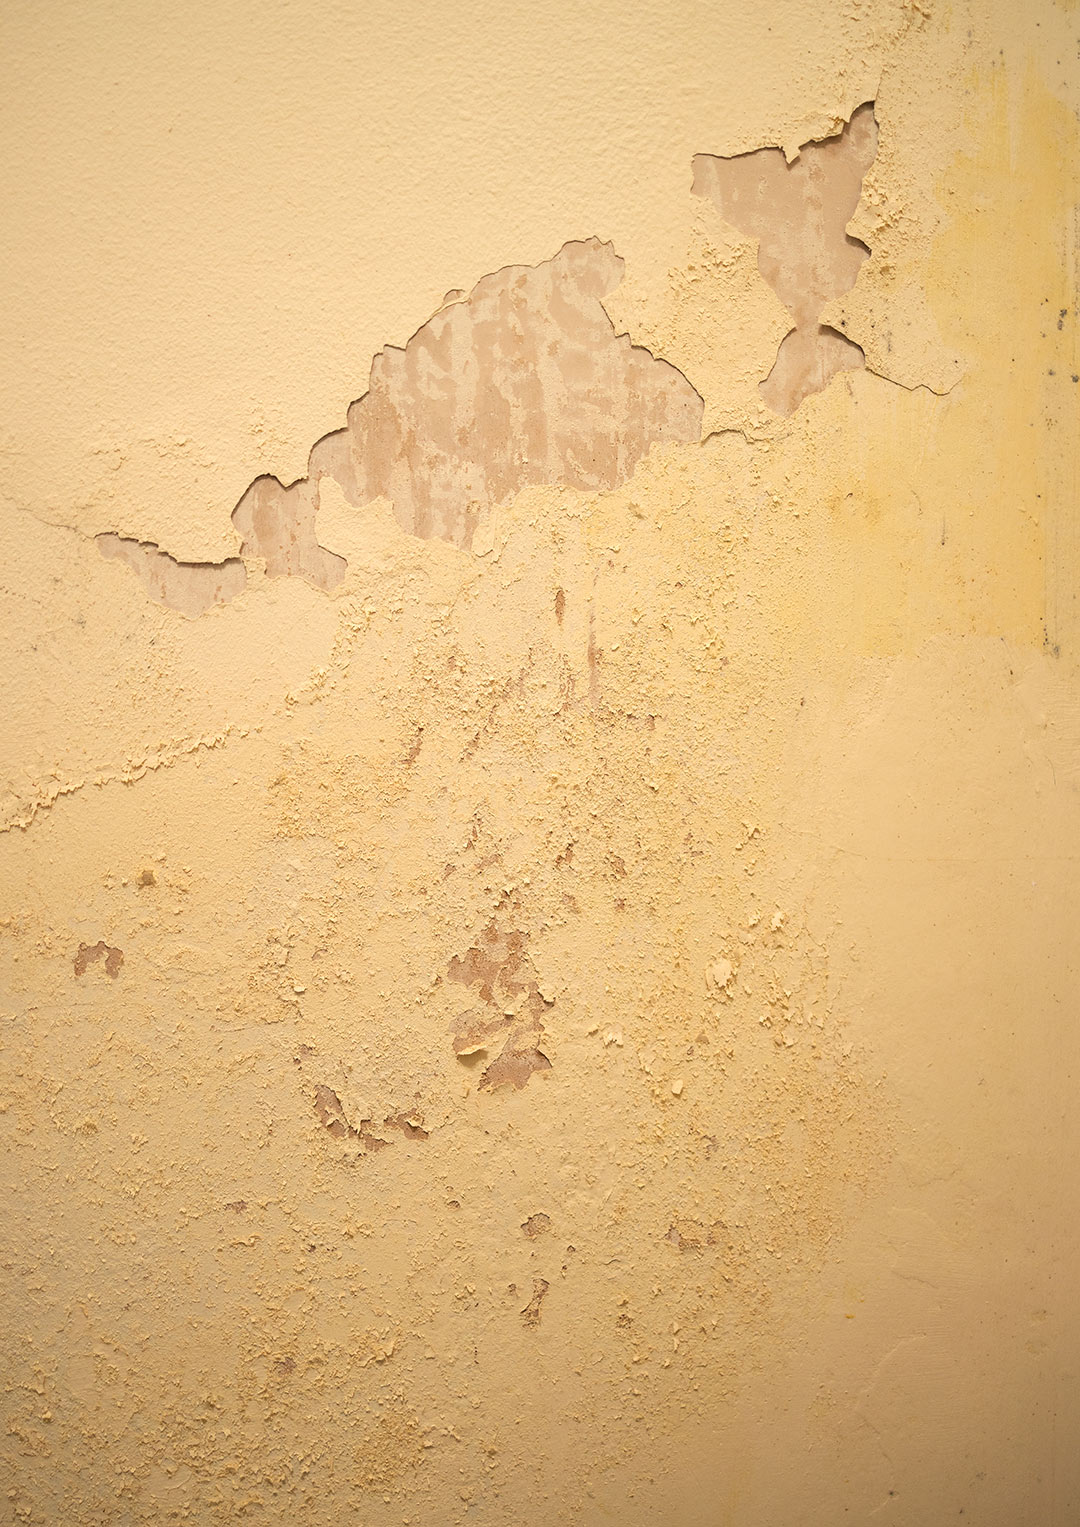 Photo of cracked and flaking plaster on wall